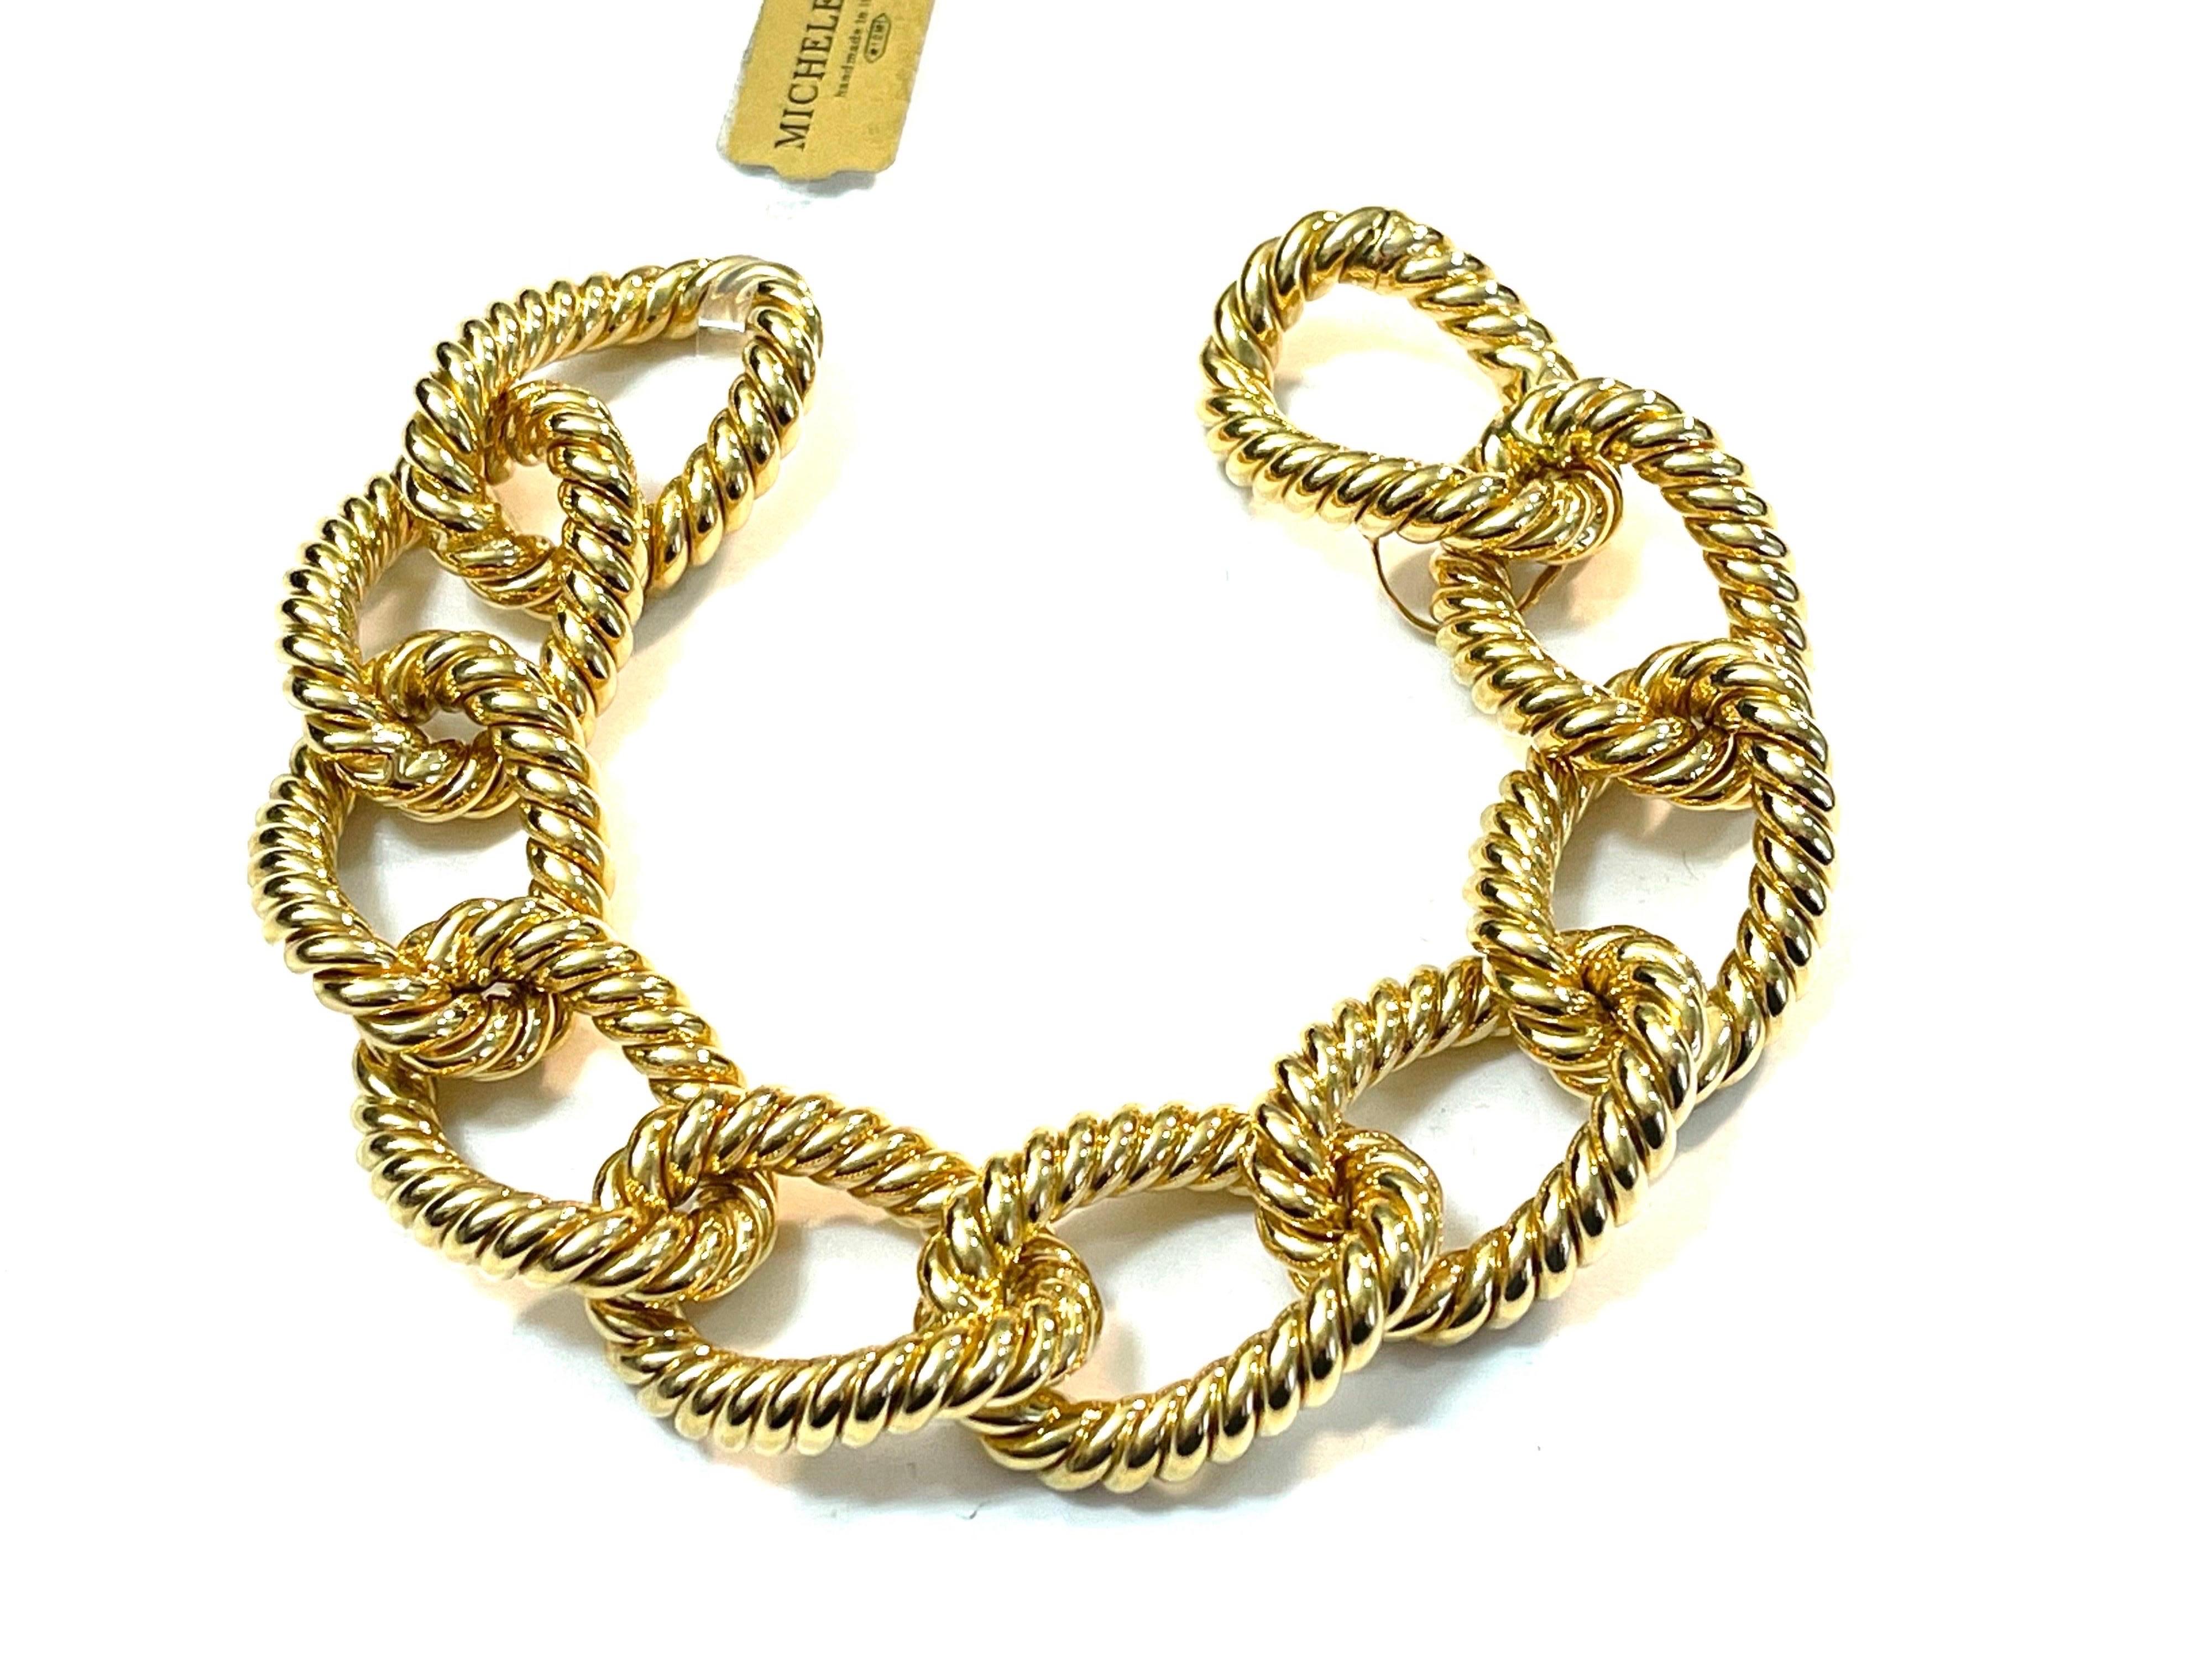 Rope bracelet in 18 kt  yellow gold 
This is a traditional collection in Micheletto 

the total weight of the gold is  gr 83.6

STAMP: 10 MI ITALY 750

The full set is available